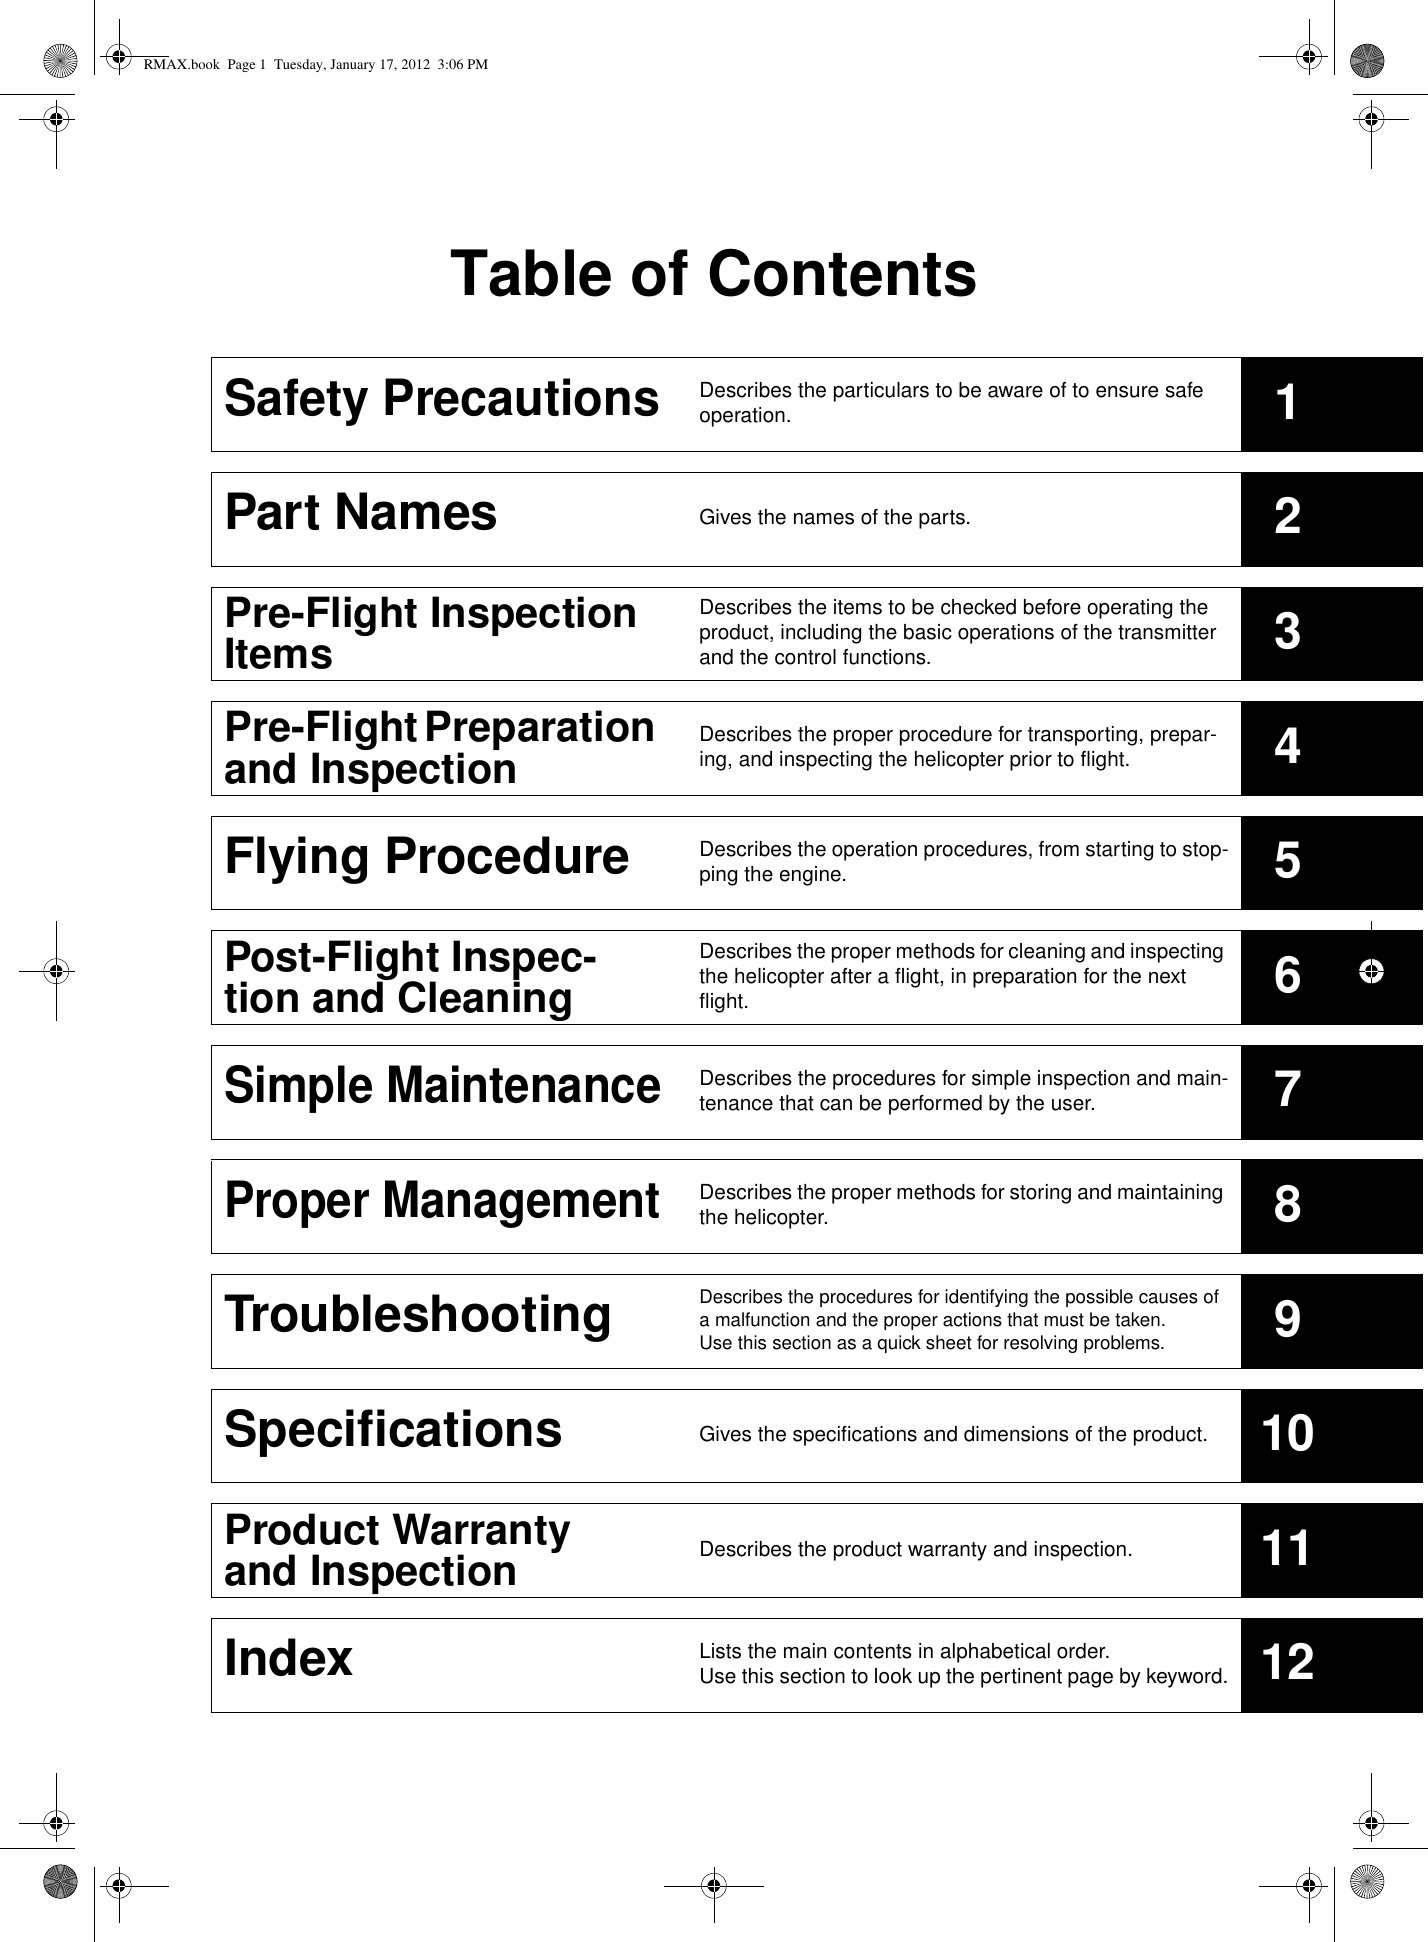 Table of ContentsSafety PrecautionsDescribes the particulars to be aware of to ensure safe operation. 1Part Names Gives the names of the parts. 2Pre-Flight Inspection ItemsDescribes the items to be checked before operating the product, including the basic operations of the transmitter and the control functions. 3Pre-Flight Preparation and Inspection Describes the proper procedure for transporting, prepar-ing, and inspecting the helicopter prior to flight. 4Flying Procedure Describes the operation procedures, from starting to stop-ping the engine. 5Post-Flight Inspec-tion and CleaningDescribes the proper methods for cleaning and inspecting the helicopter after a flight, in preparation for the next flight. 6Simple MaintenanceDescribes the procedures for simple inspection and main-tenance that can be performed by the user. 7Proper ManagementDescribes the proper methods for storing and maintaining the helicopter. 8Troubleshooting Describes the procedures for identifying the possible causes of a malfunction and the proper actions that must be taken. Use this section as a quick sheet for resolving problems. 9Specifications Gives the specifications and dimensions of the product. 10Product Warranty and Inspection Describes the product warranty and inspection. 11Index Lists the main contents in alphabetical order. Use this section to look up the pertinent page by keyword. 12RMAX.book  Page 1  Tuesday, January 17, 2012  3:06 PM